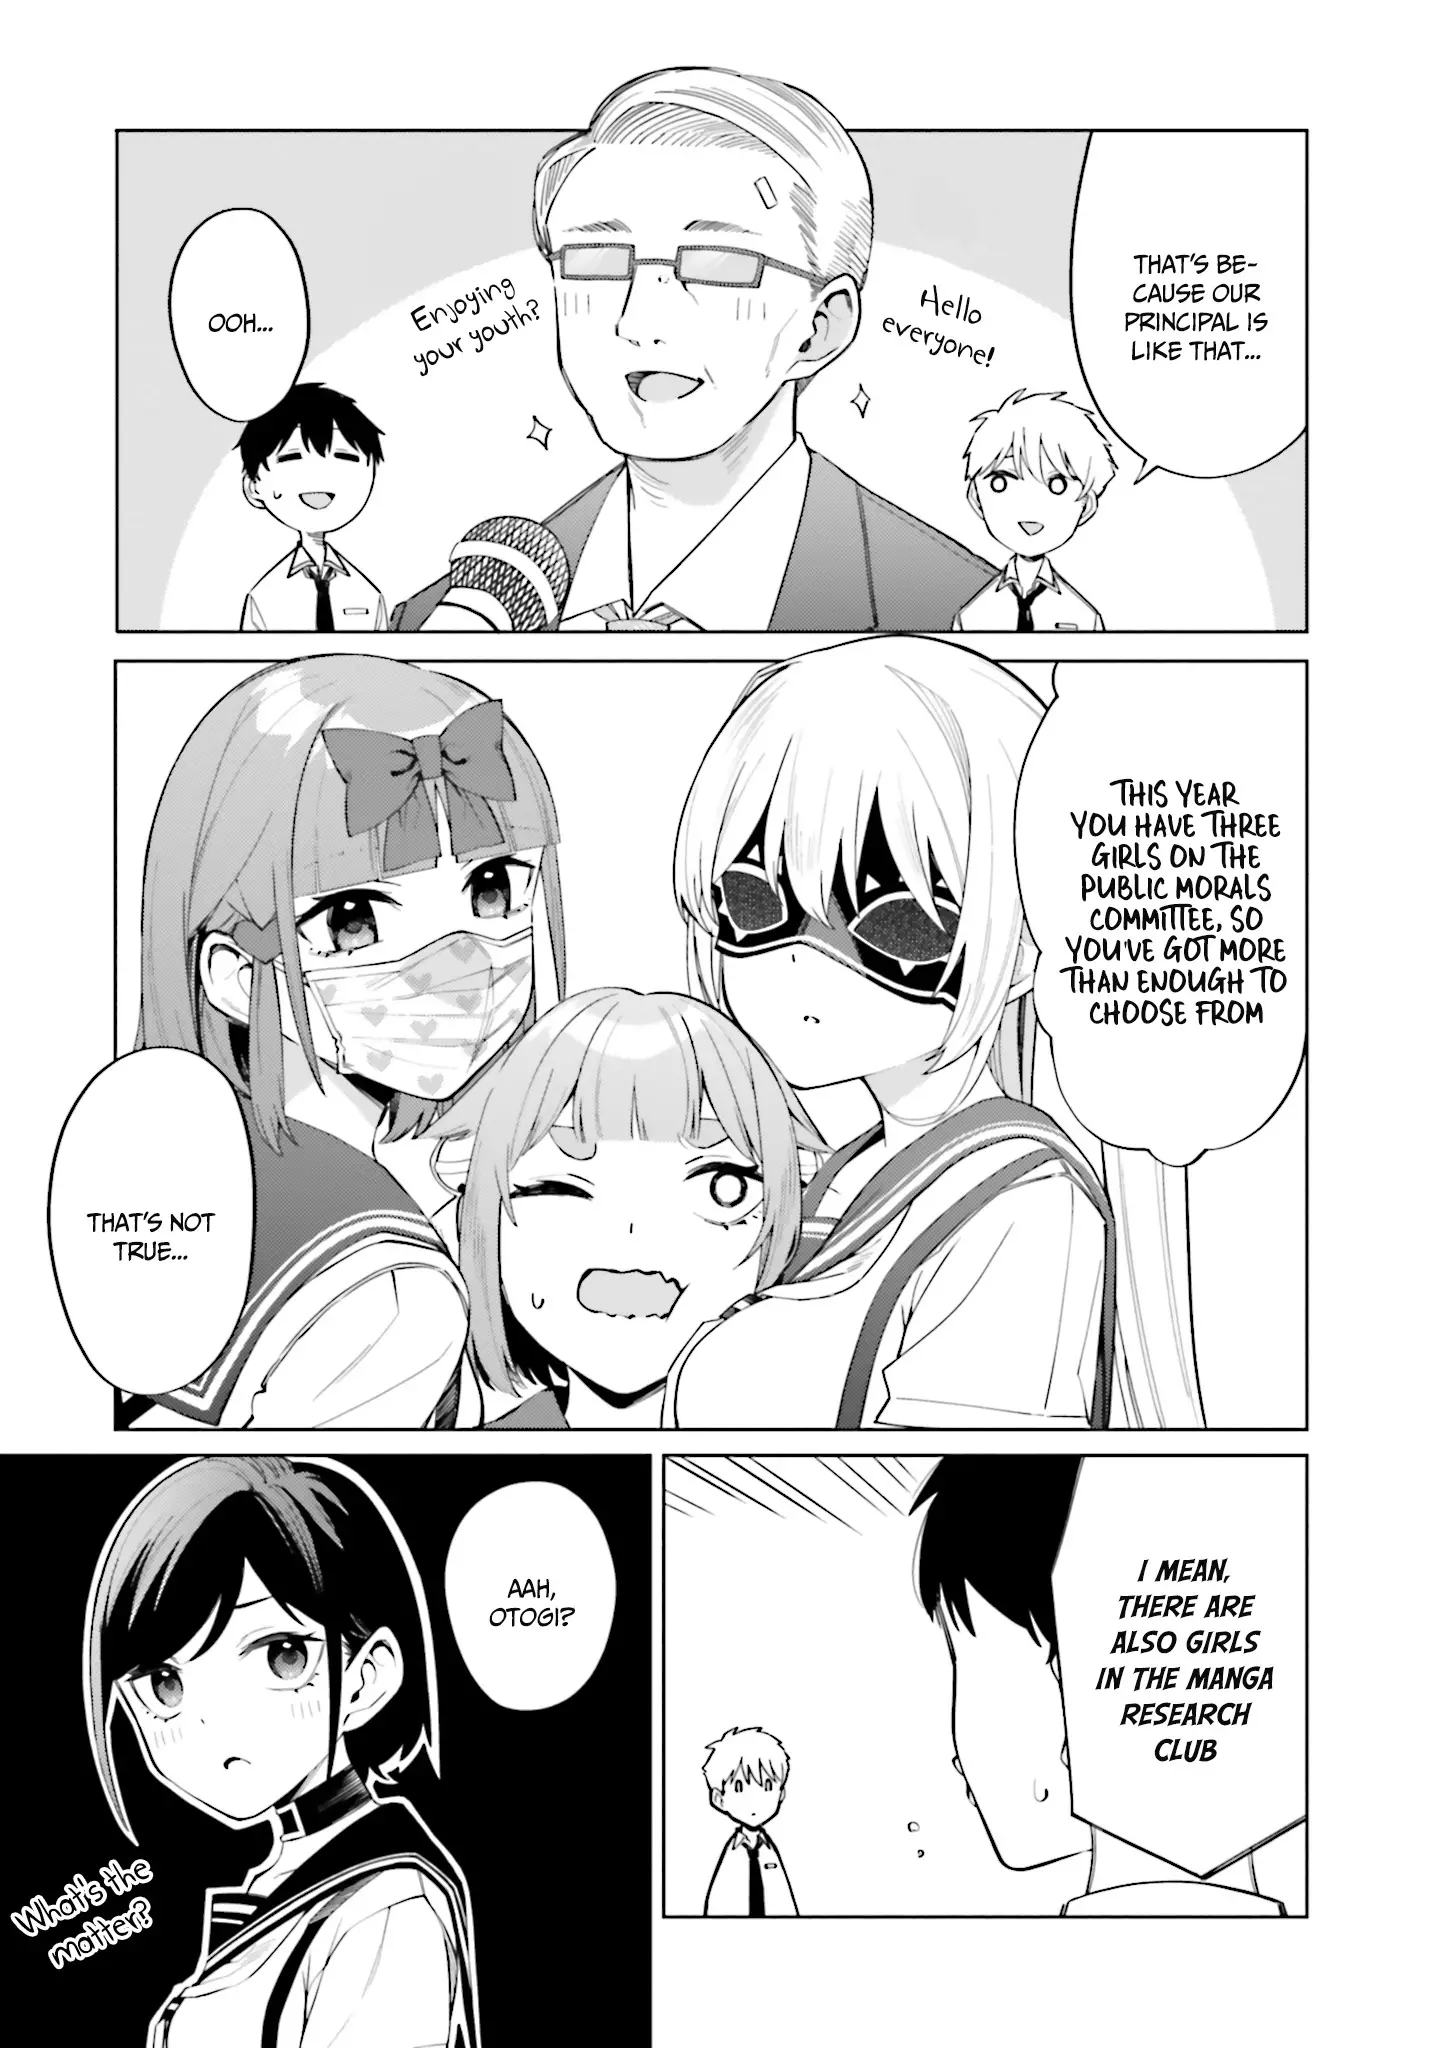 I Don't Understand Shirogane-San's Facial Expression At All - 13 page 12-8574a142